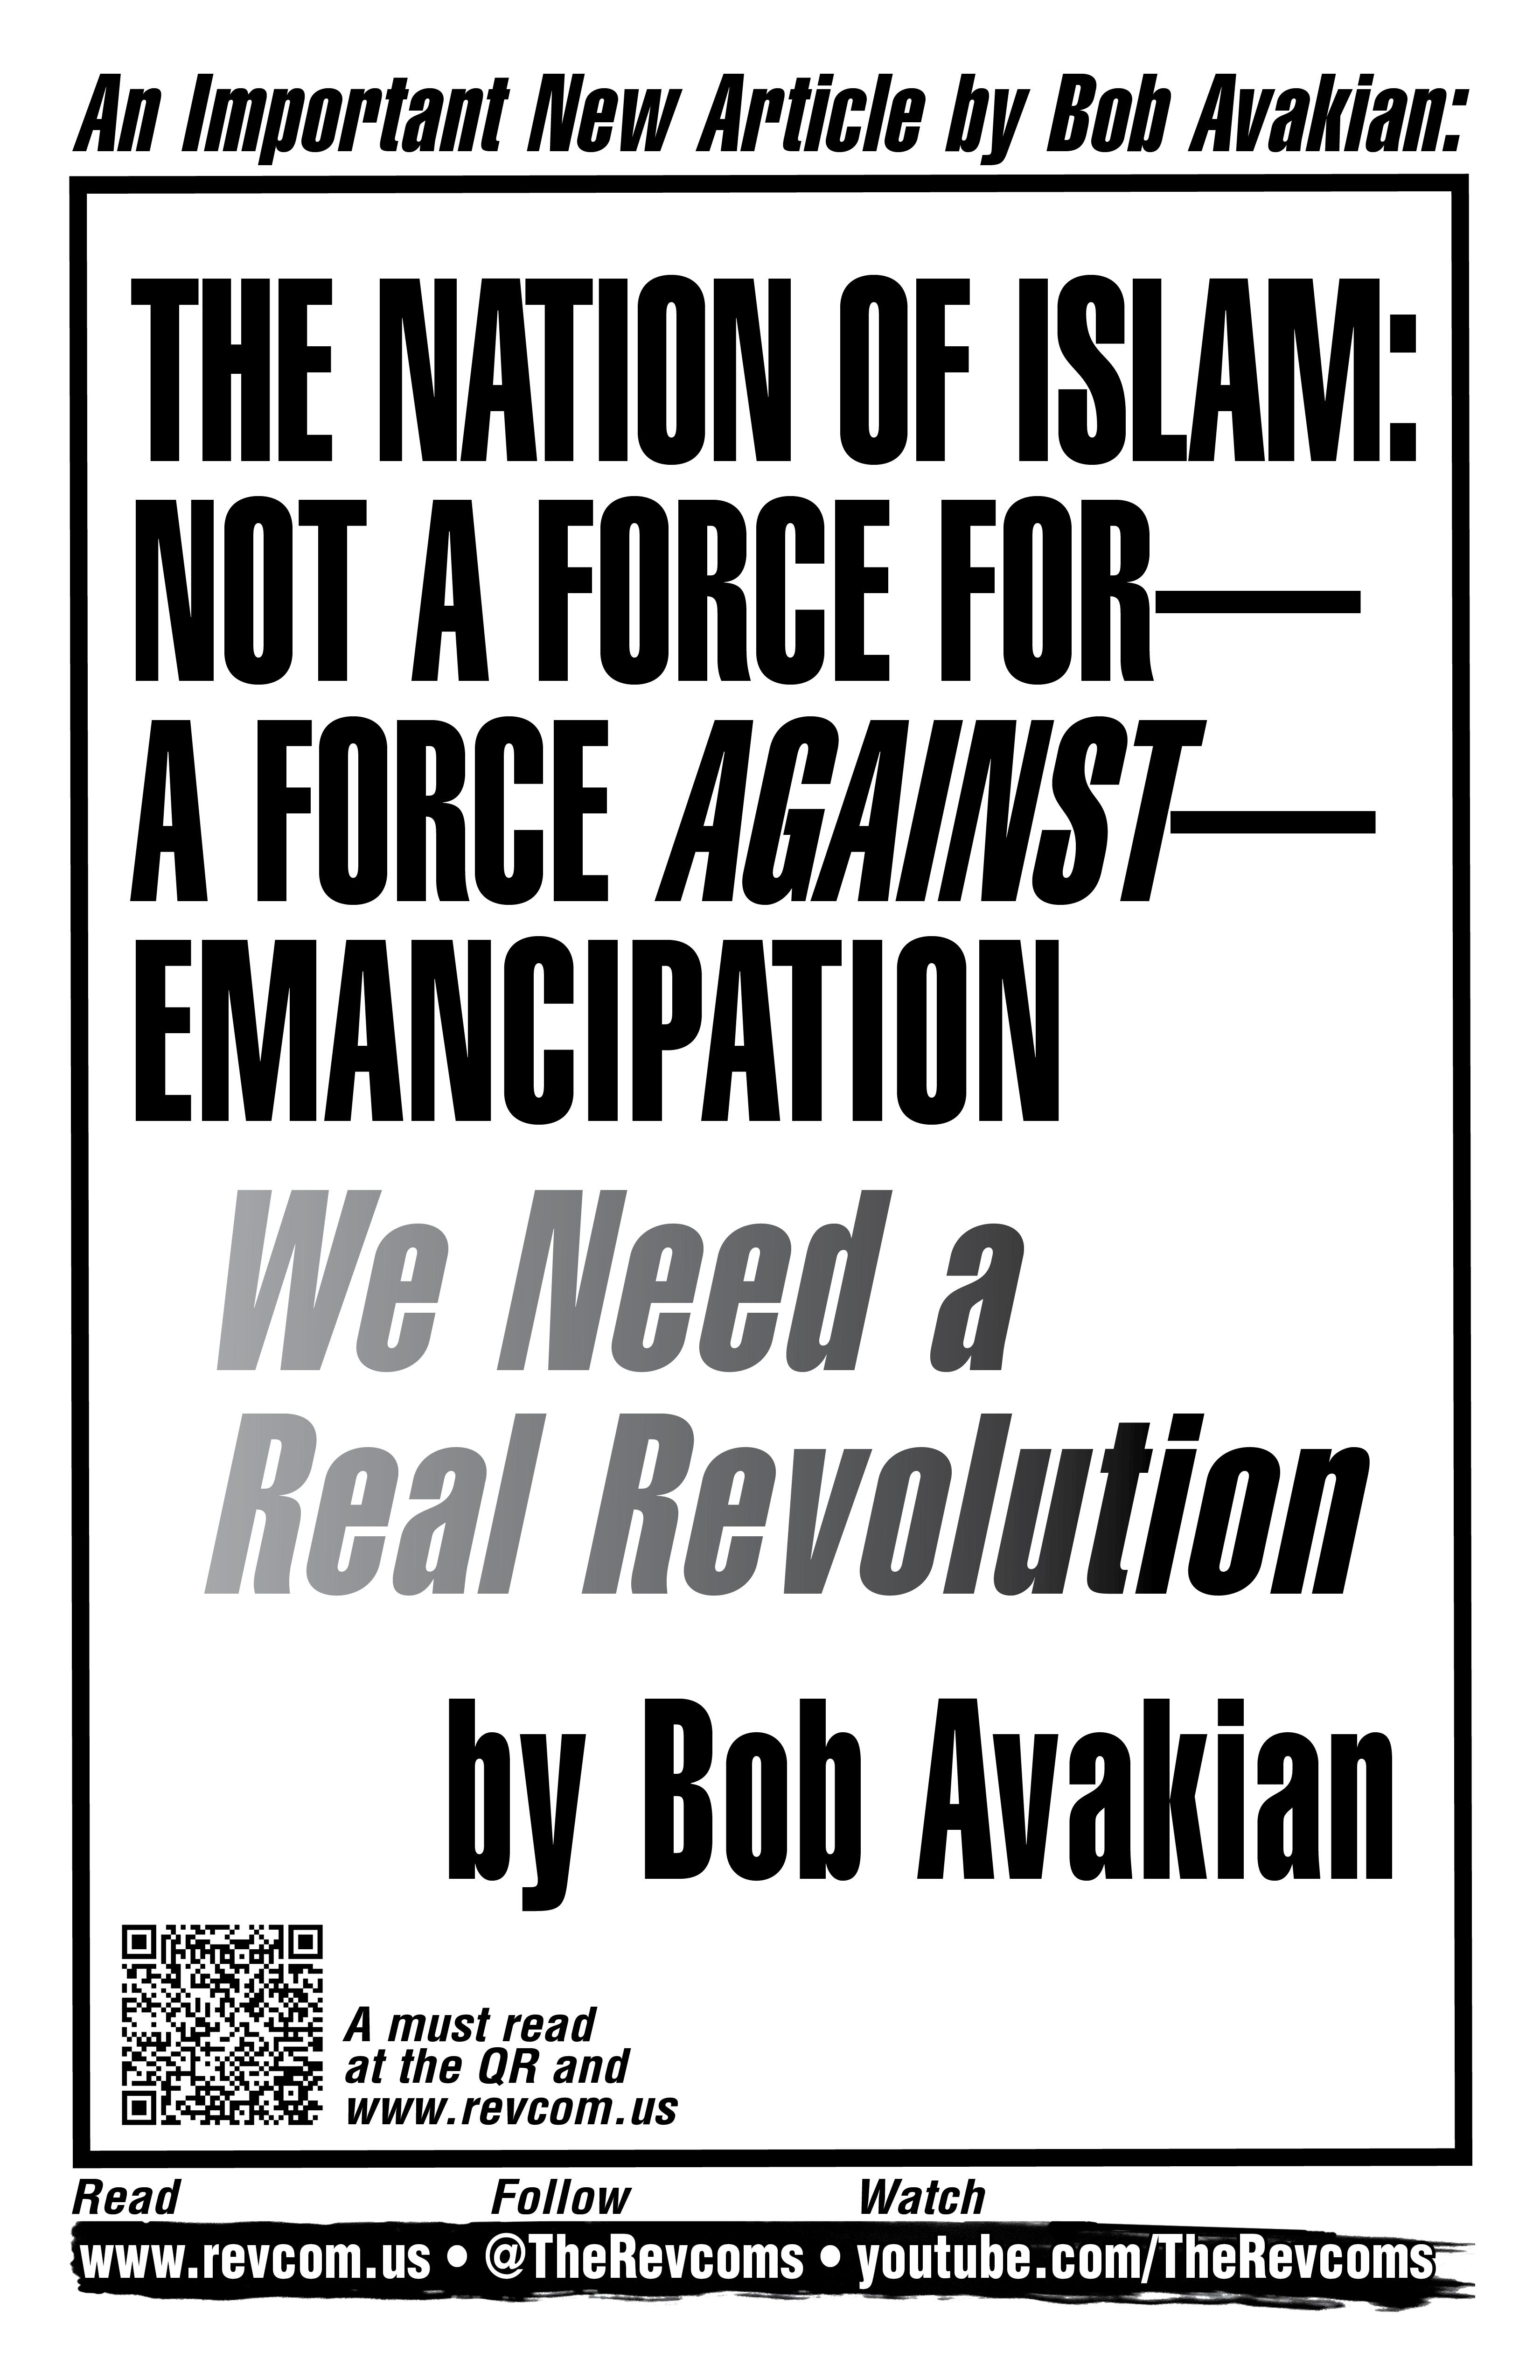 poster  Bob Avakian nation of Islam a force against emancipation